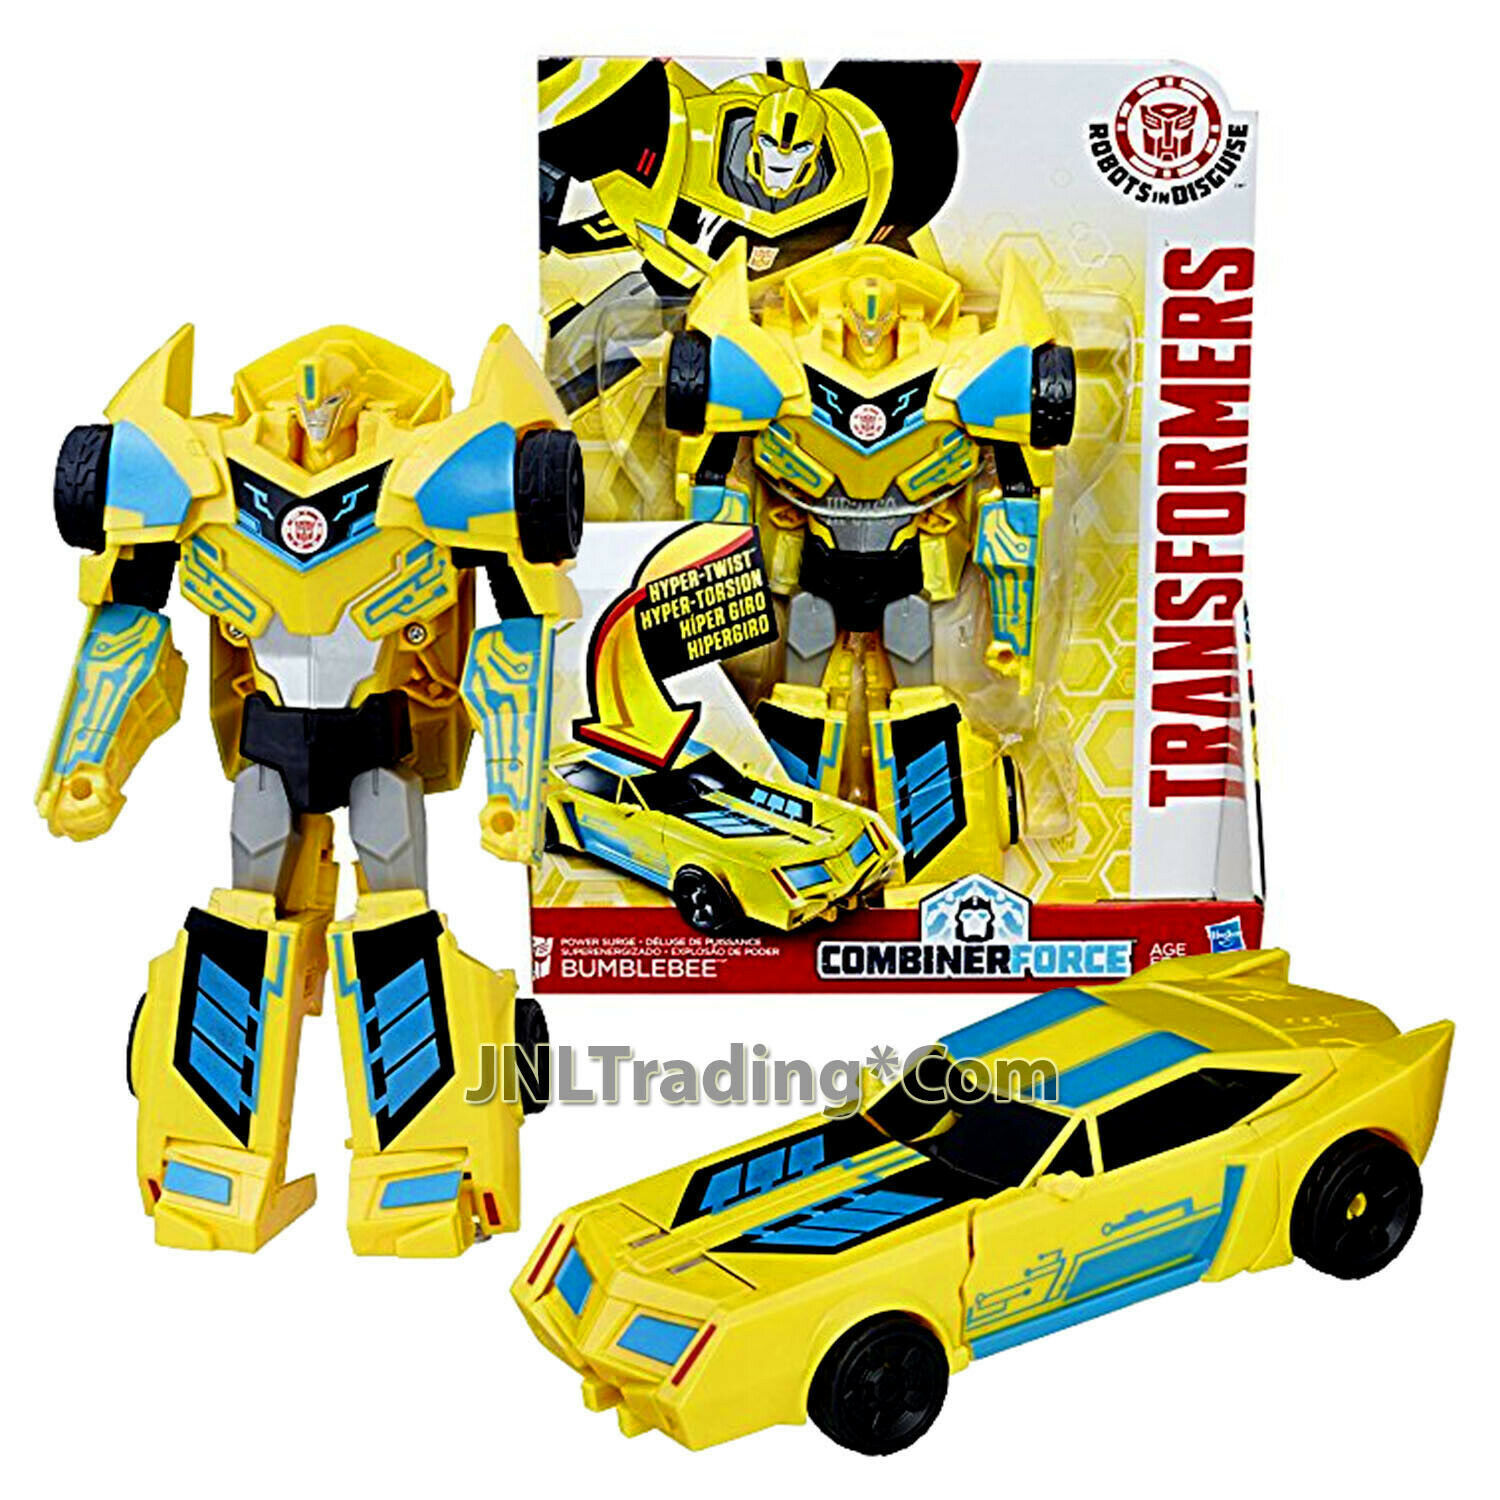 Primary image for Year 2016 Transformer RID Combiner Force 3 Steps Change 8" POWER SURGE BUMBLEBEE